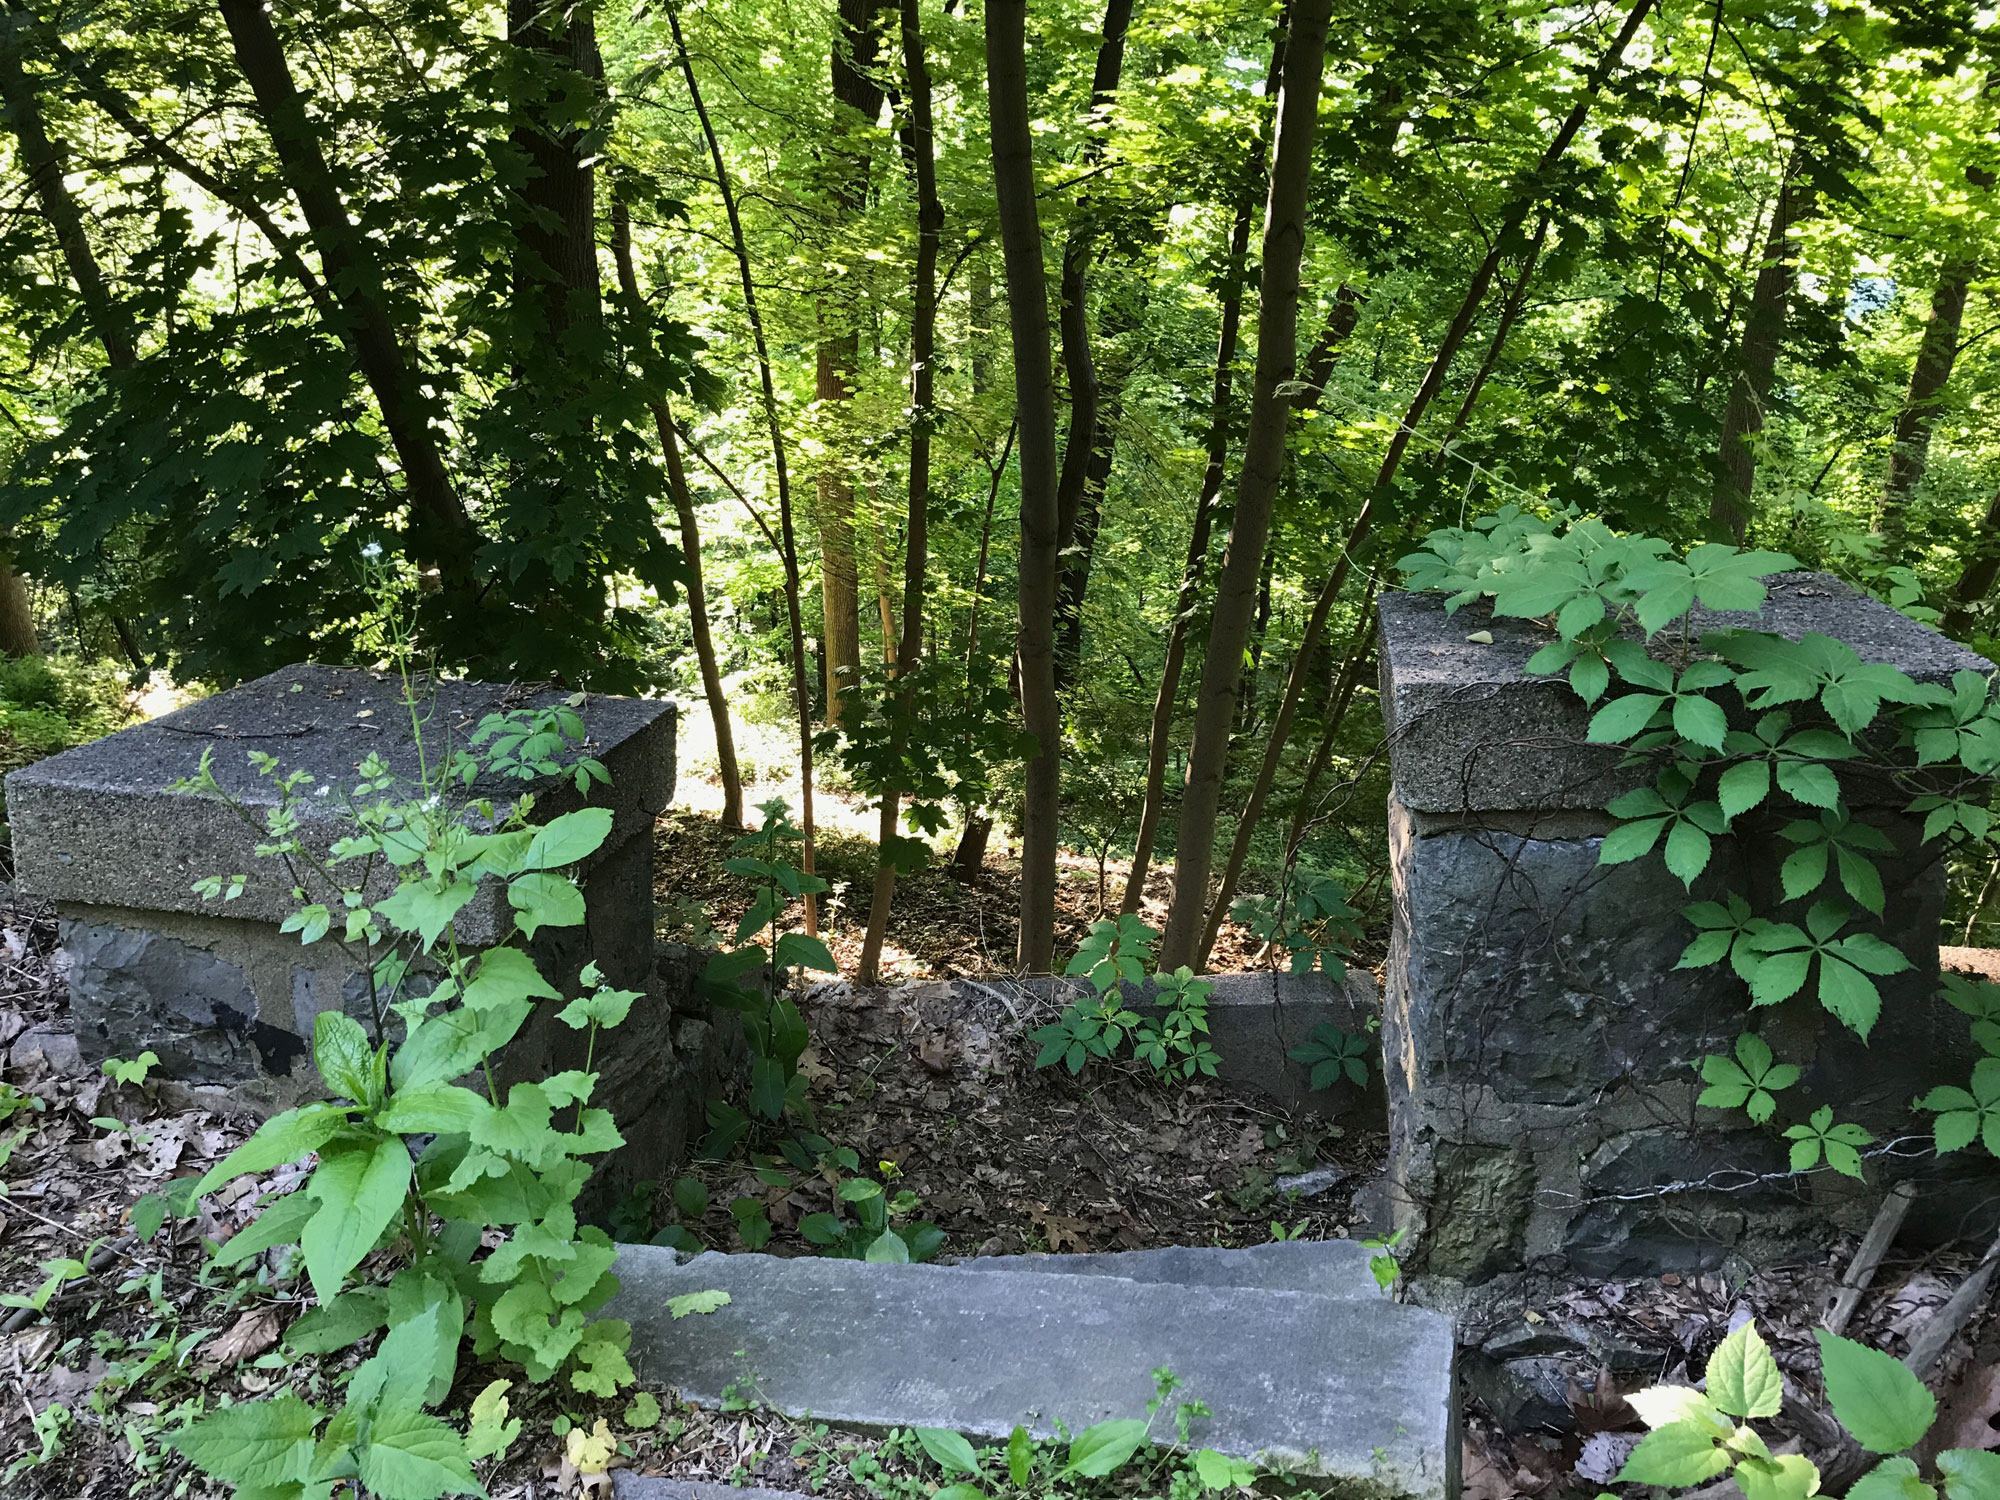 A stone staircase leads to a forested hill.